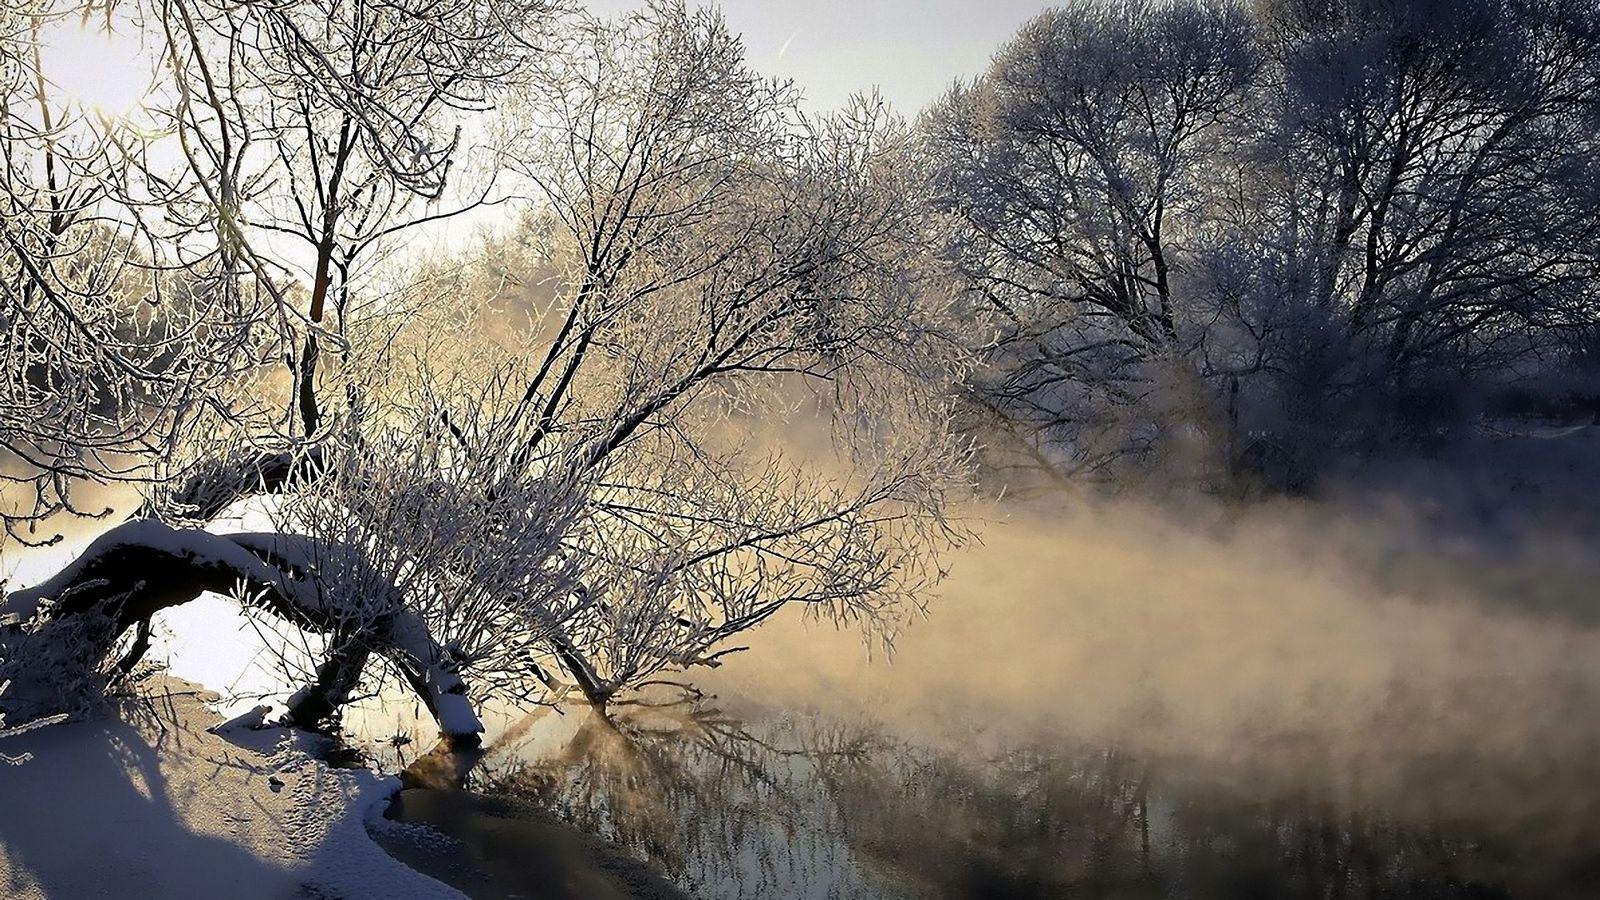 Download wallpaper 1600x900 fog, river, tree, ice, cold, frost